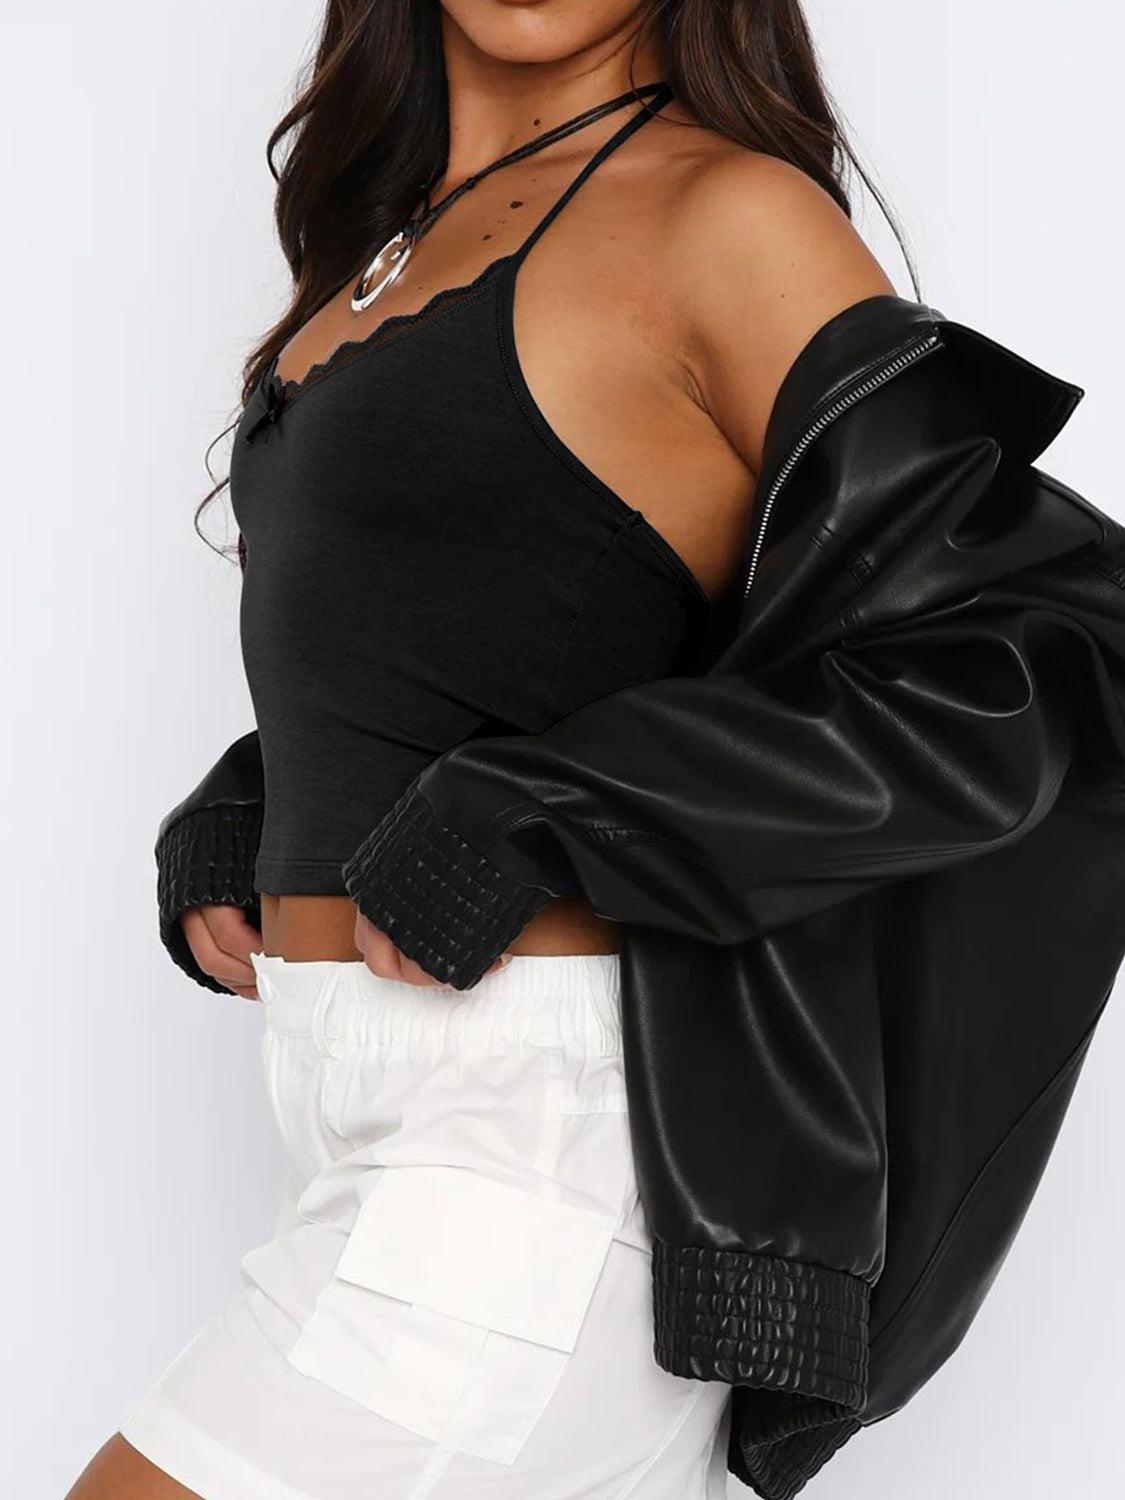 a woman wearing a black crop top and white shorts